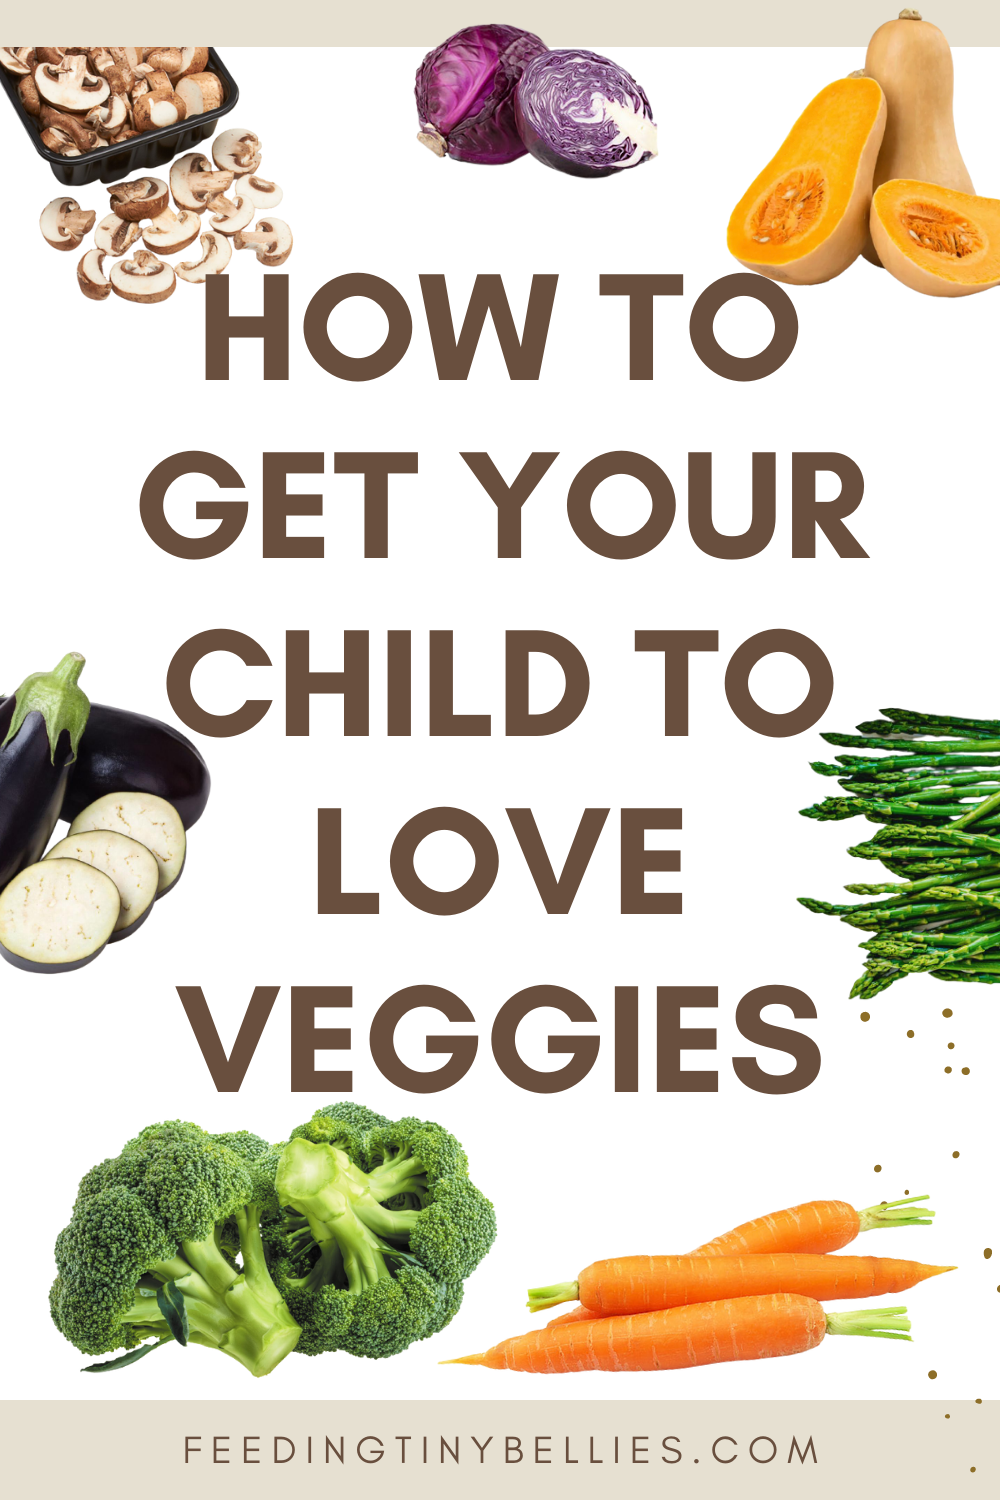 How to get your child to love veggies.